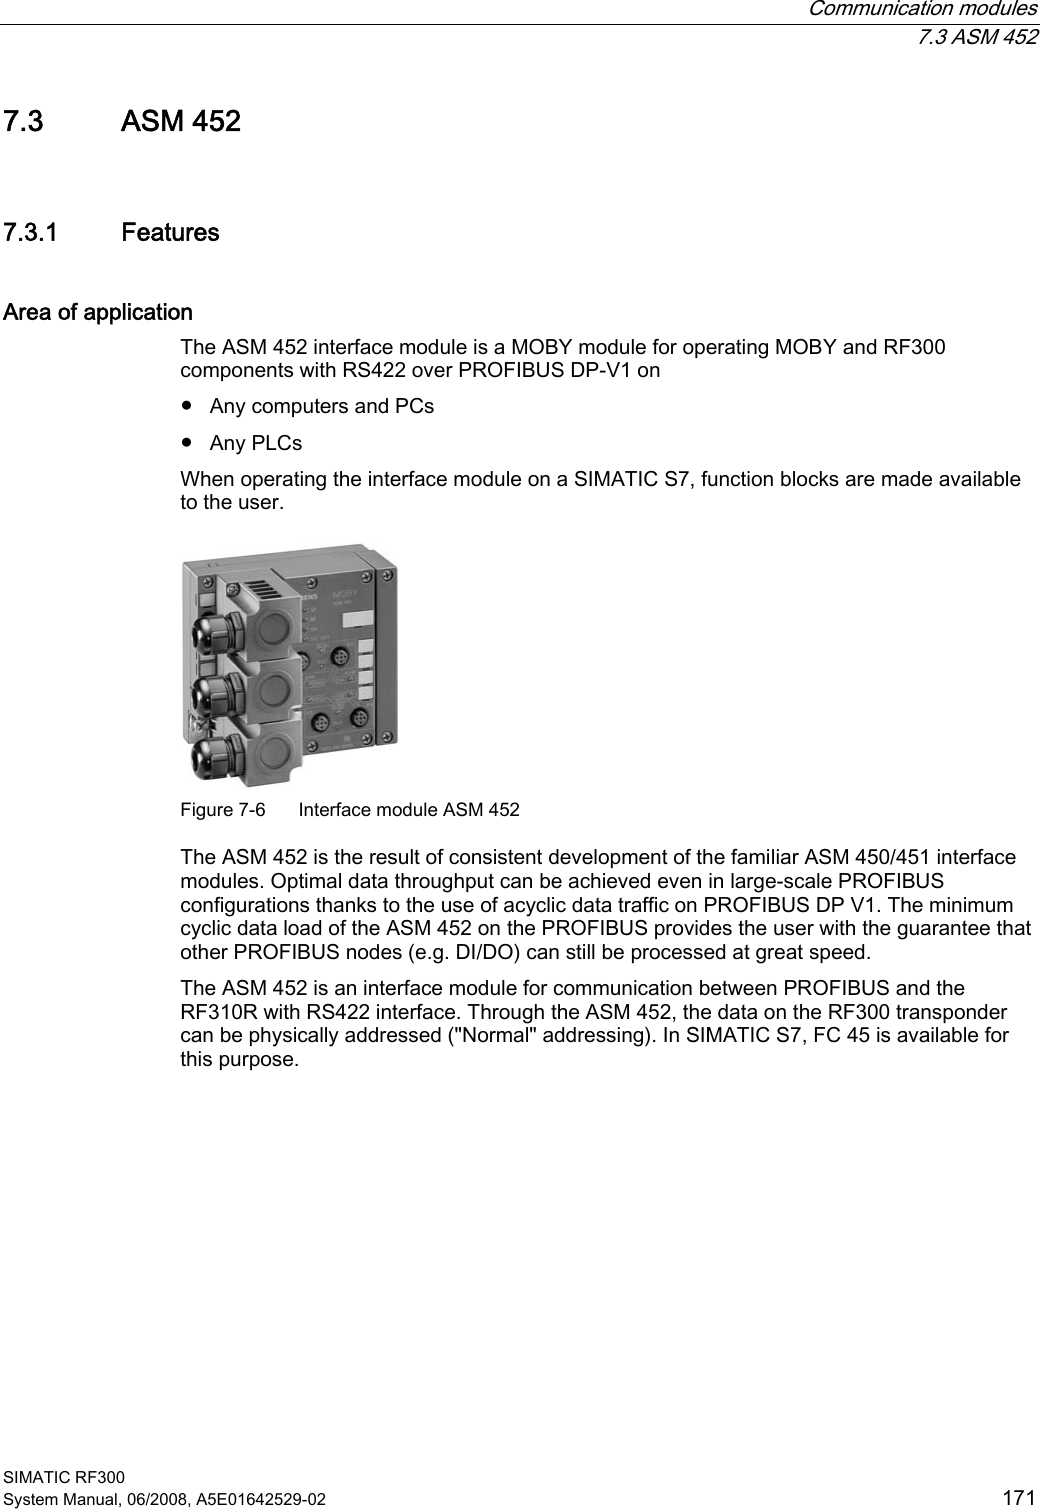  Communication modules  7.3 ASM 452 SIMATIC RF300 System Manual, 06/2008, A5E01642529-02  171 7.3 ASM 452 7.3.1 Features Area of application The ASM 452 interface module is a MOBY module for operating MOBY and RF300 components with RS422 over PROFIBUS DP-V1 on ● Any computers and PCs ● Any PLCs When operating the interface module on a SIMATIC S7, function blocks are made available to the user.  Figure 7-6  Interface module ASM 452 The ASM 452 is the result of consistent development of the familiar ASM 450/451 interface modules. Optimal data throughput can be achieved even in large-scale PROFIBUS configurations thanks to the use of acyclic data traffic on PROFIBUS DP V1. The minimum cyclic data load of the ASM 452 on the PROFIBUS provides the user with the guarantee that other PROFIBUS nodes (e.g. DI/DO) can still be processed at great speed. The ASM 452 is an interface module for communication between PROFIBUS and the RF310R with RS422 interface. Through the ASM 452, the data on the RF300 transponder can be physically addressed (&quot;Normal&quot; addressing). In SIMATIC S7, FC 45 is available for this purpose. 